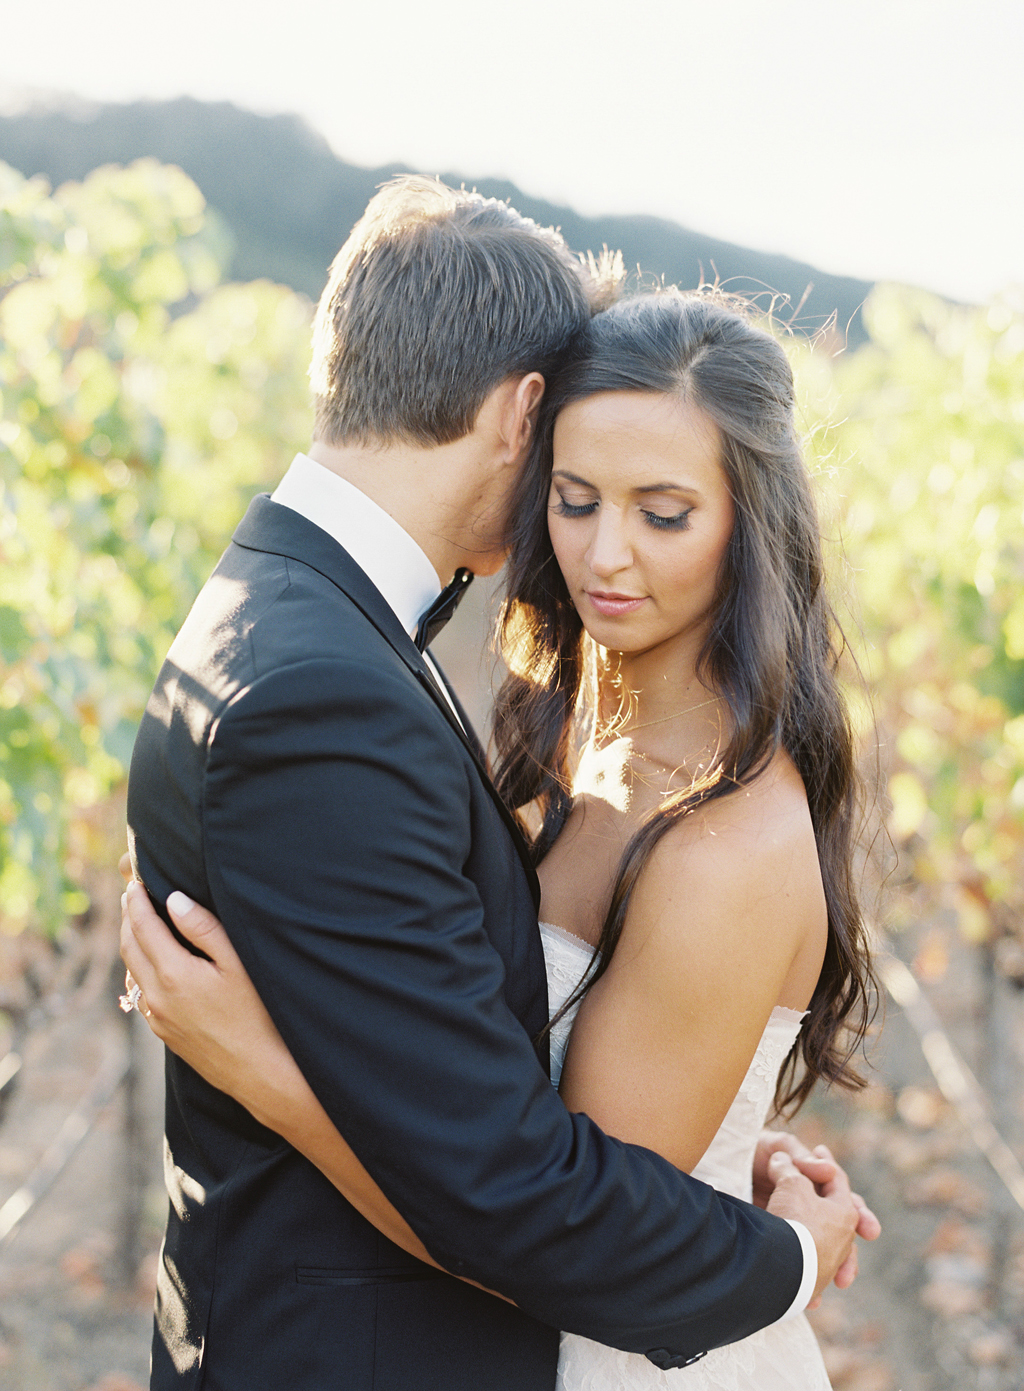 A couple embrace for a portrait in a napa vineyard shot on film photography.